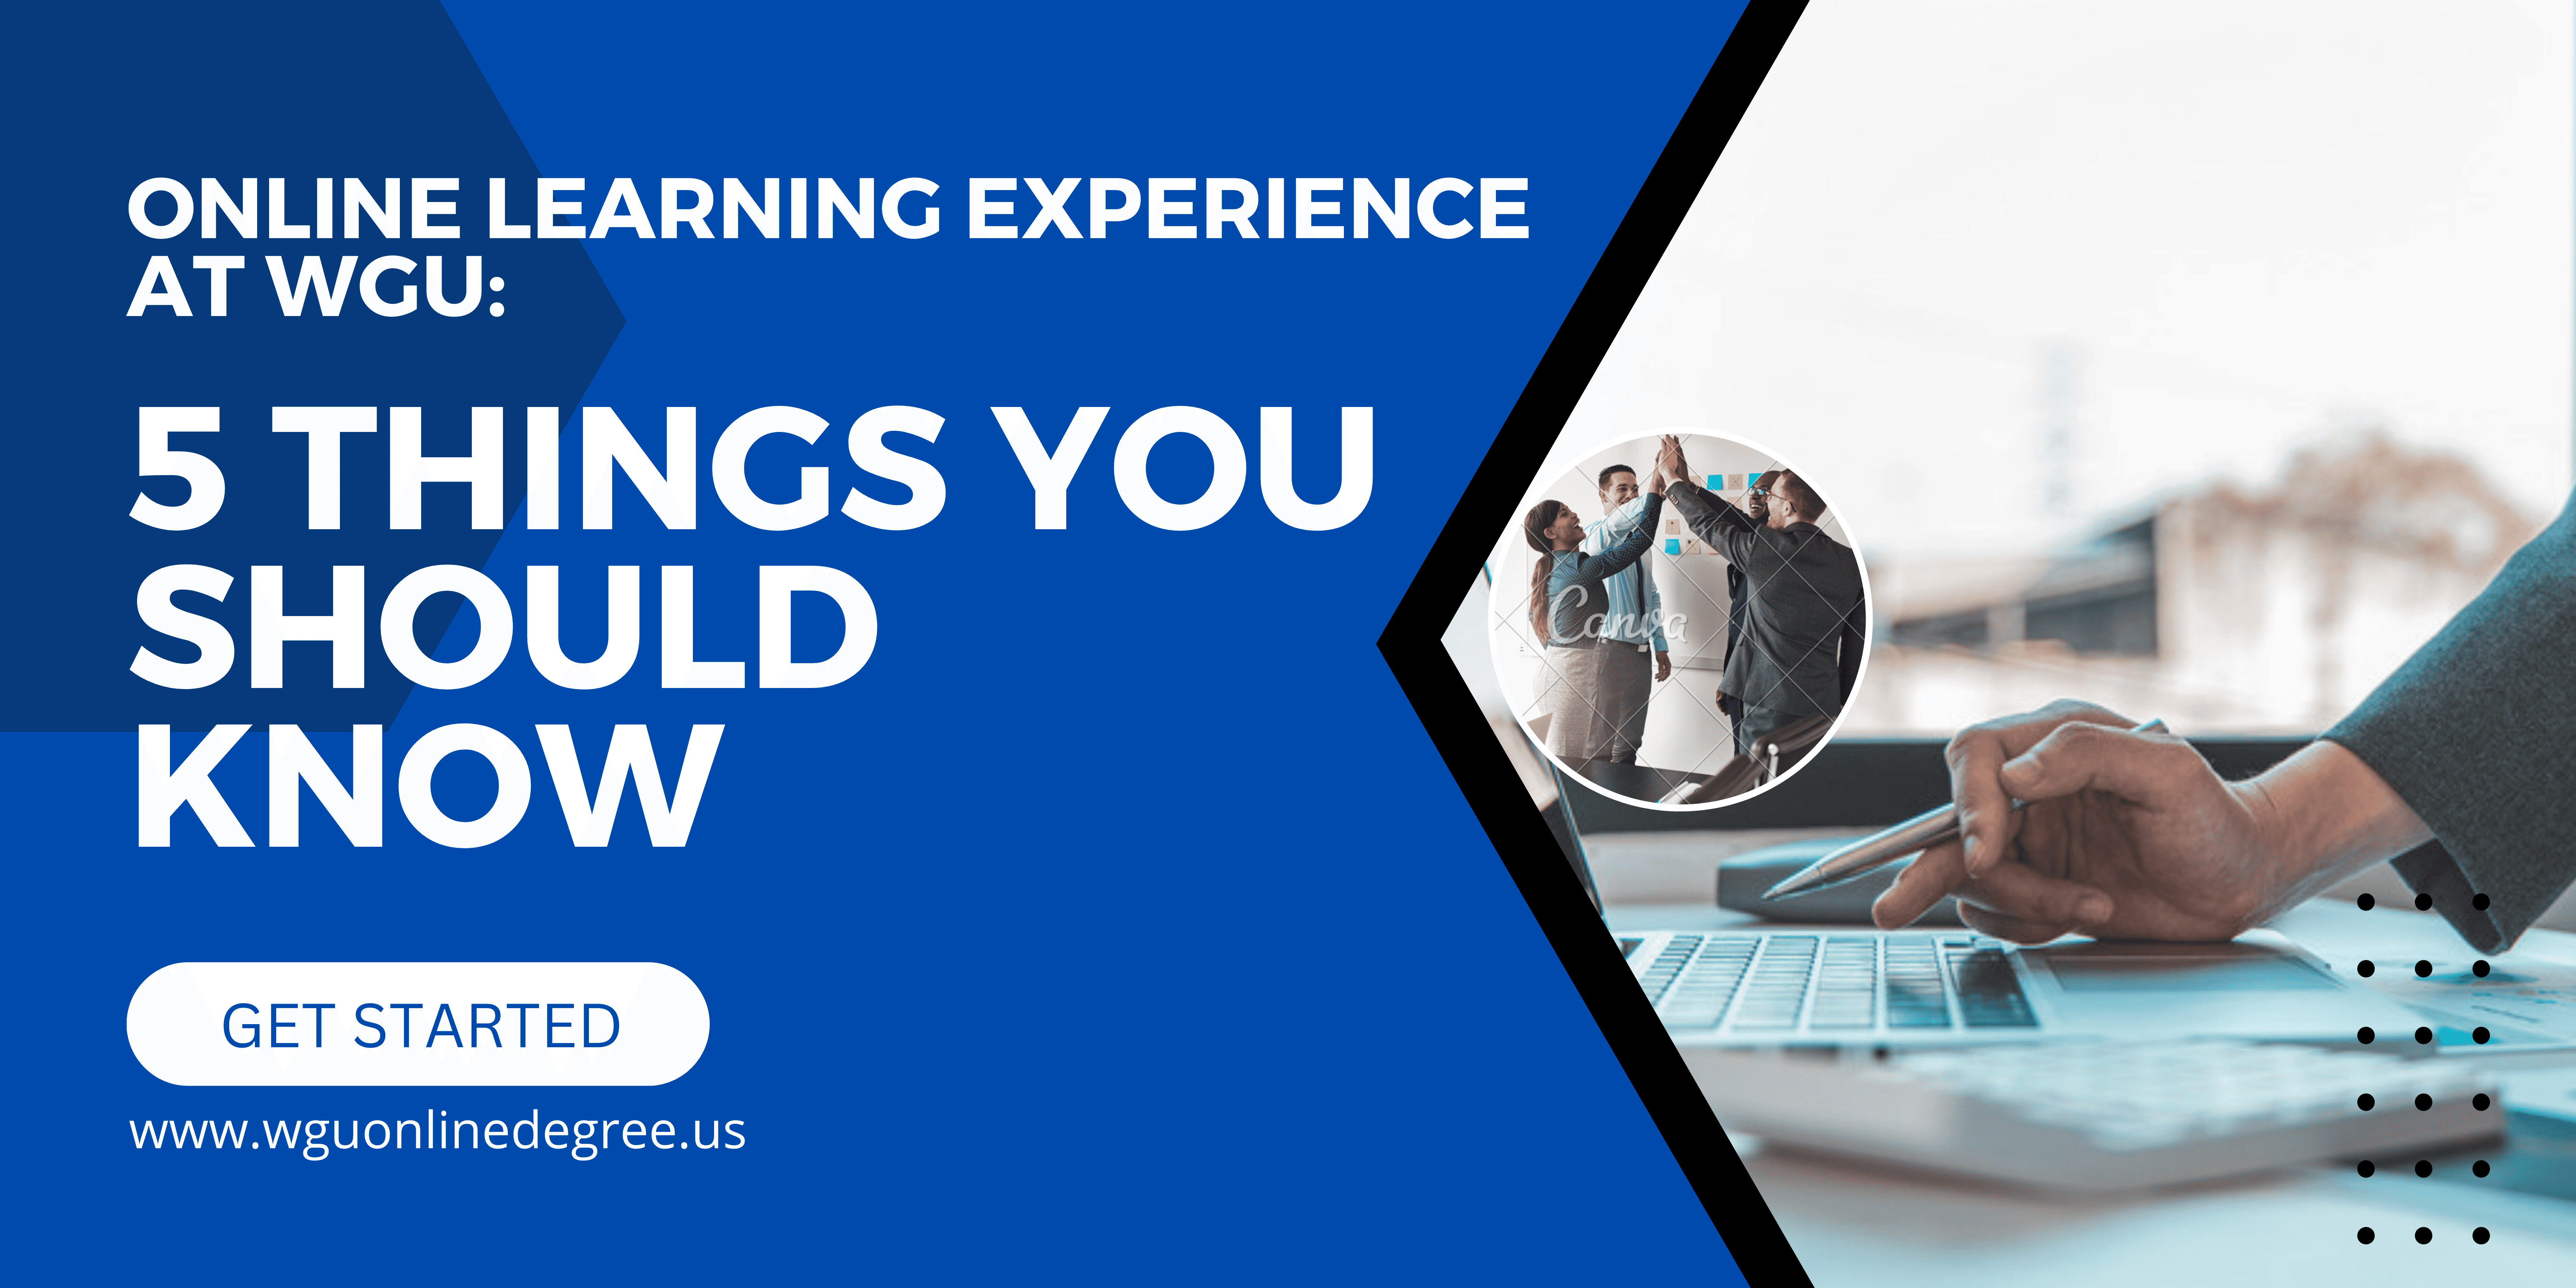 Online Learning Experience at WGU: 5 Things You Should Know